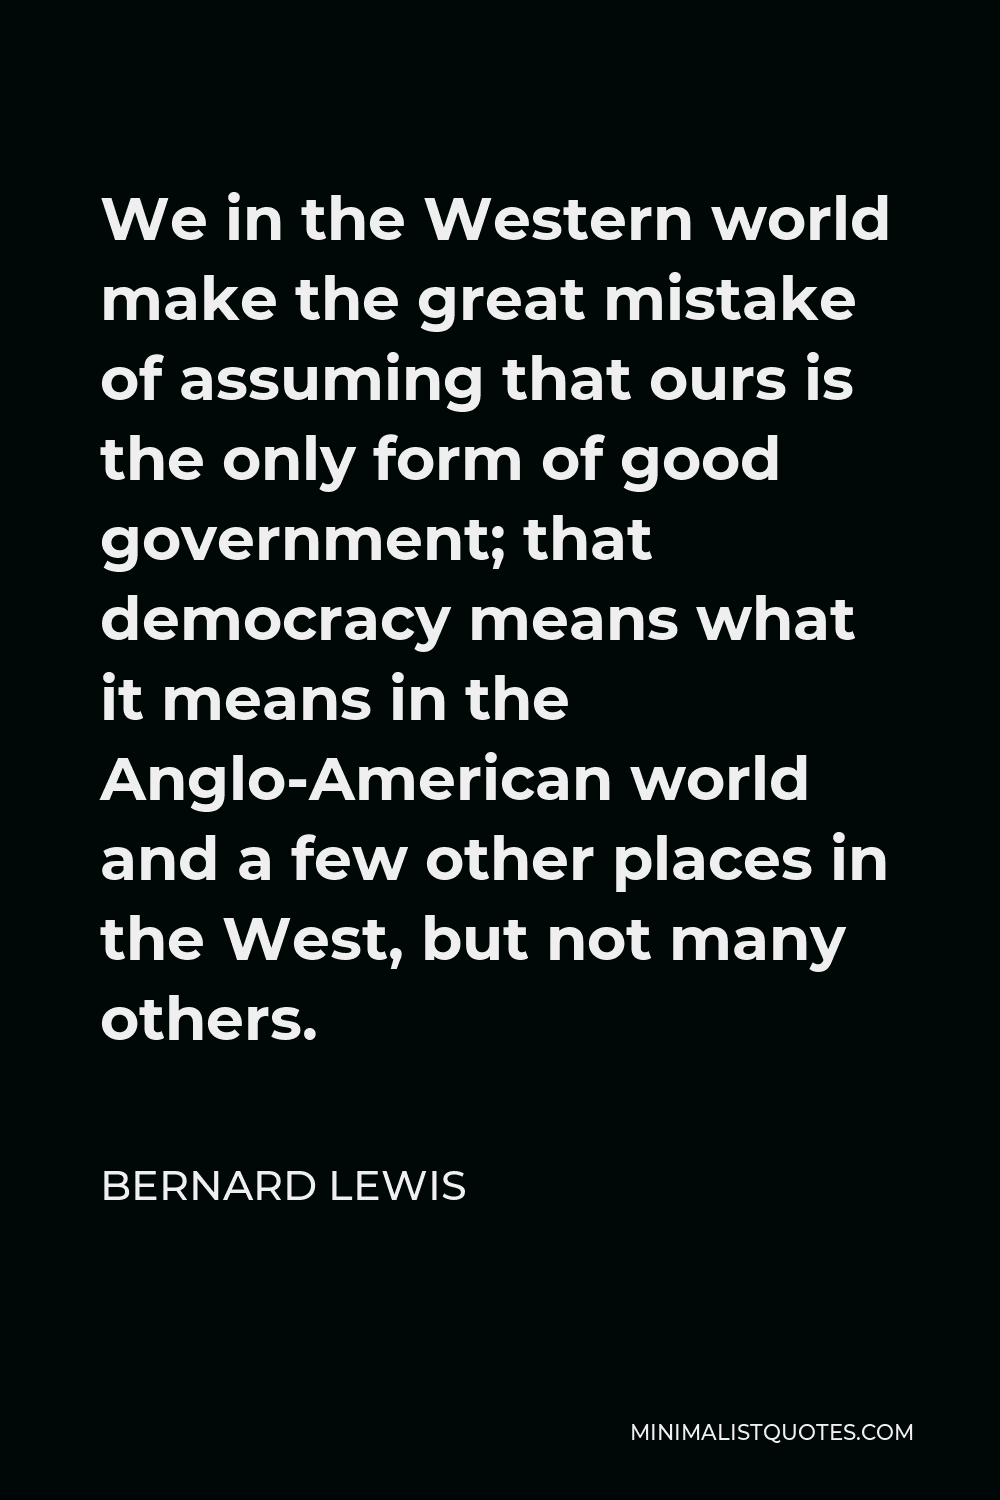 Bernard Lewis Quote - We in the Western world make the great mistake of assuming that ours is the only form of good government; that democracy means what it means in the Anglo-American world and a few other places in the West, but not many others.